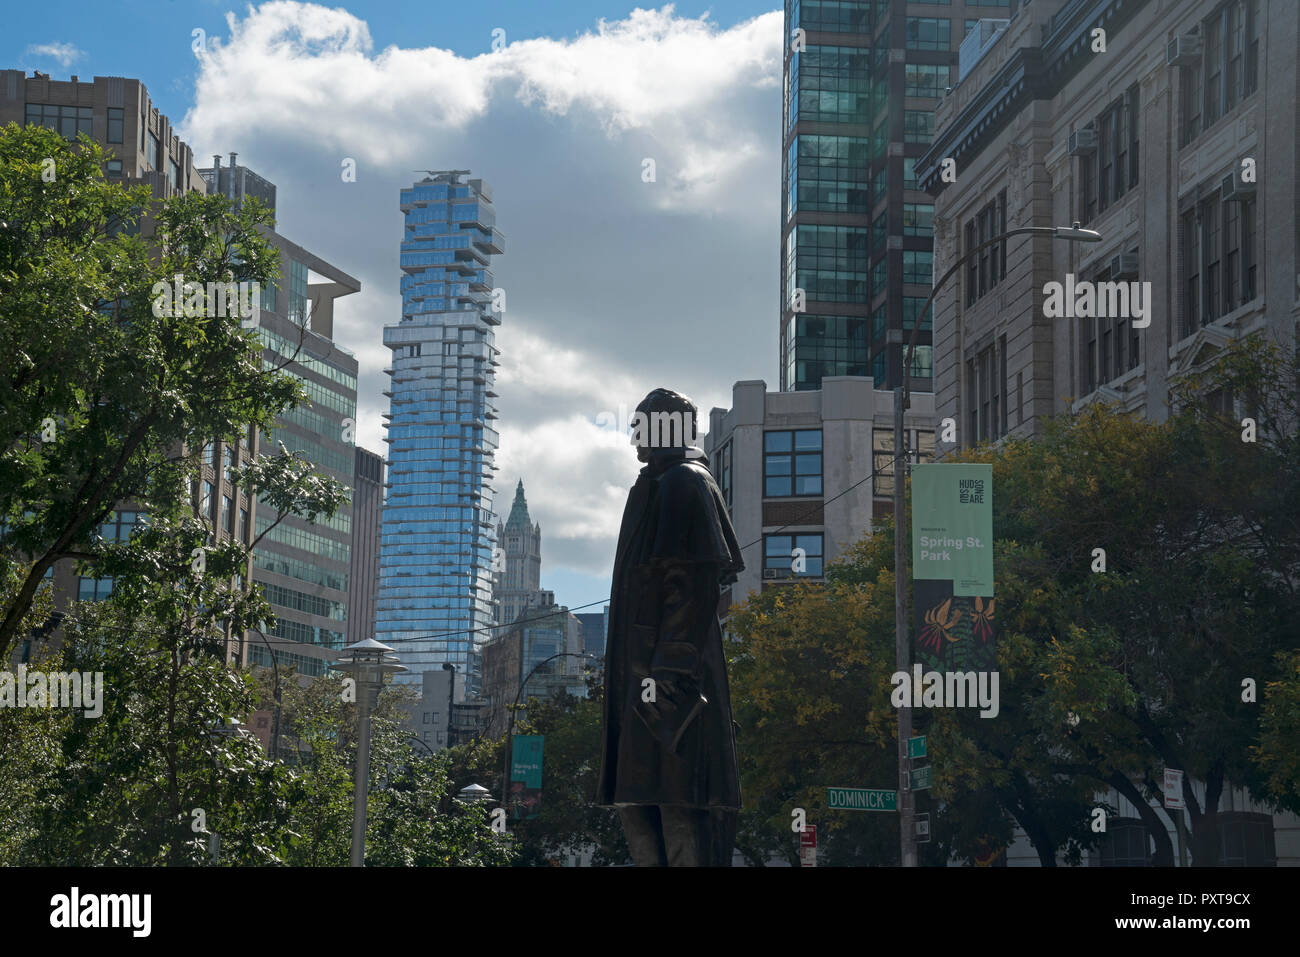 A statue of Uruguayan hero José Artigas stands in Spring Street Park in Manhattan's Soho neighborhood, with the Woolworth Building in the distance. Stock Photo